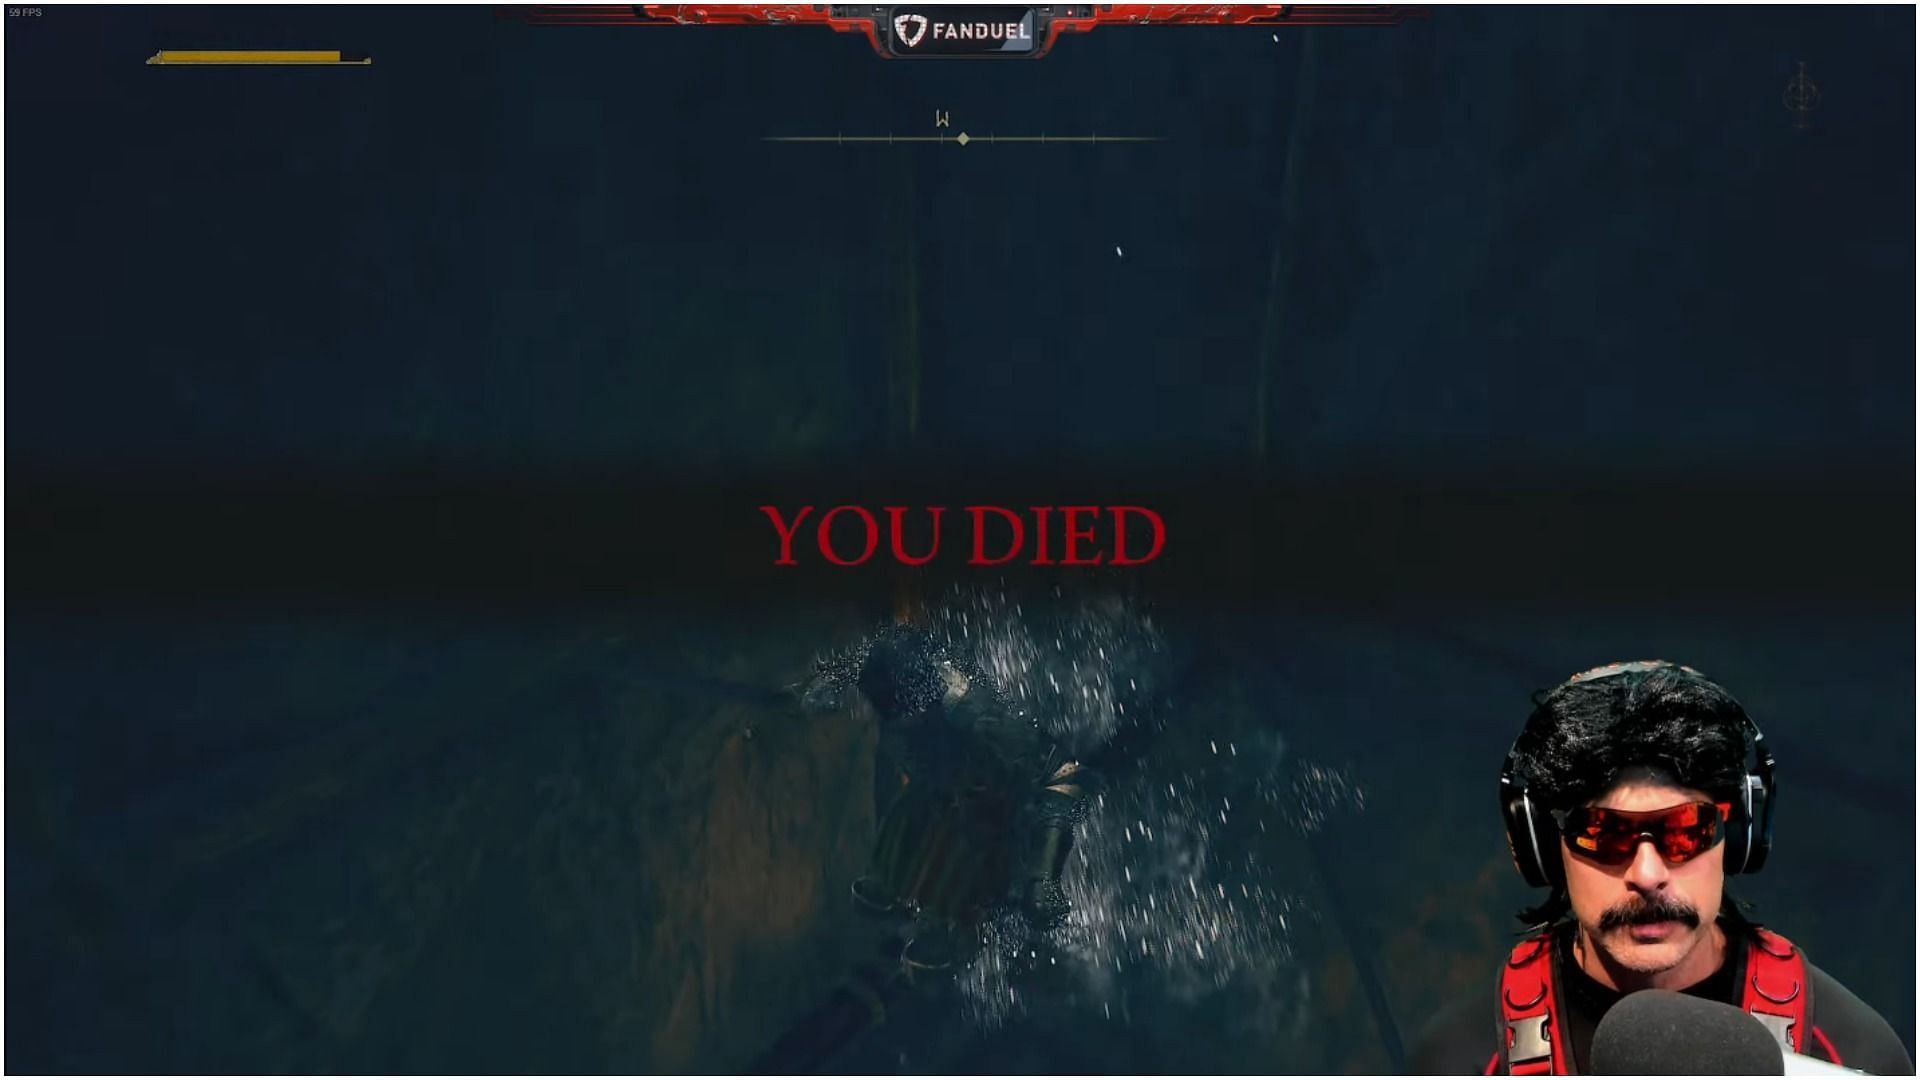 Dr DisRespect hilariously dies in Elden Ring immediately after praising the game (Image via YouTube/DrDisRespect)